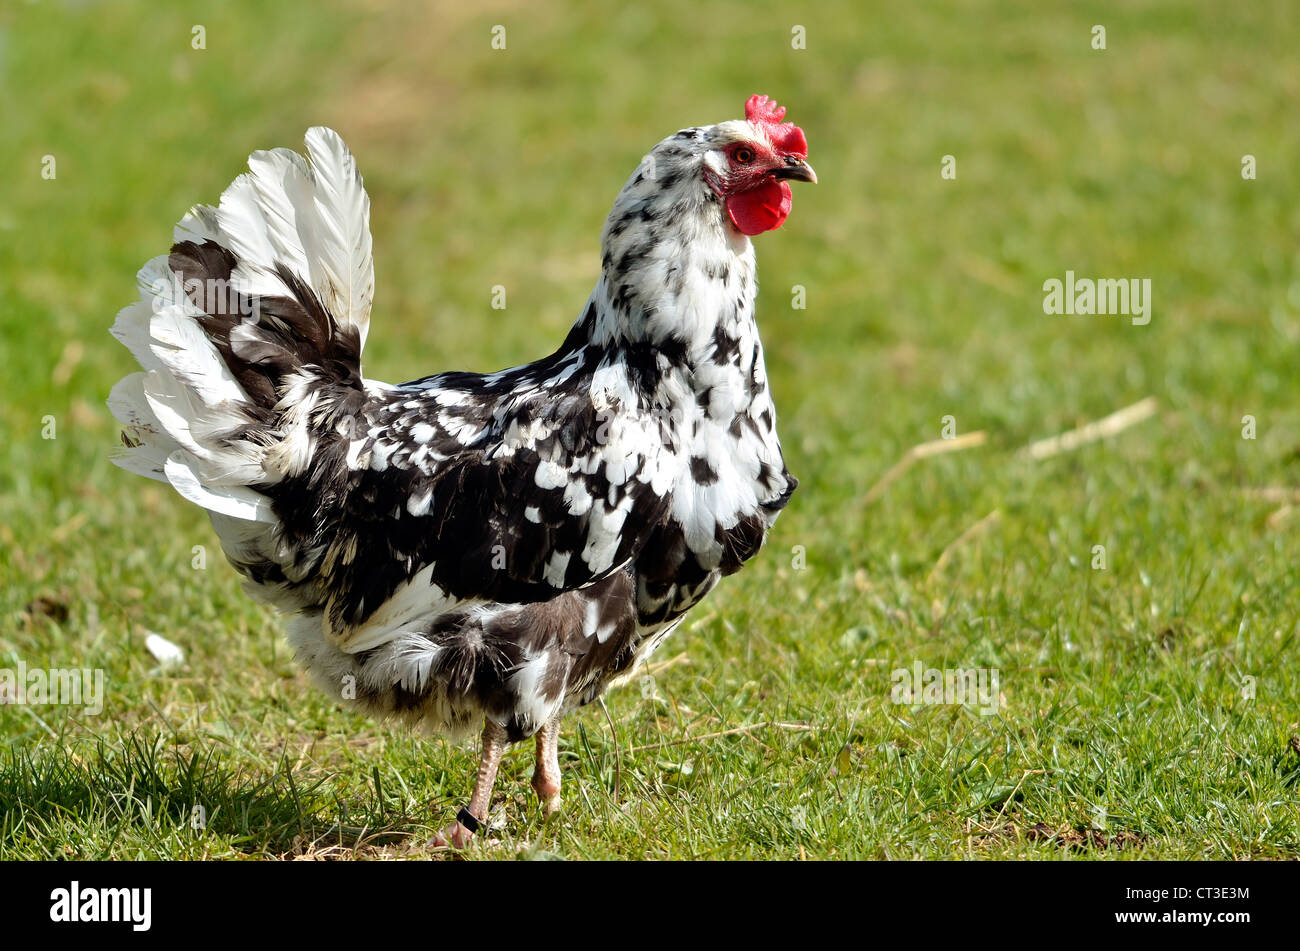 Black and white hen (Gallus) standing on grass and viewed of profile Stock Photo